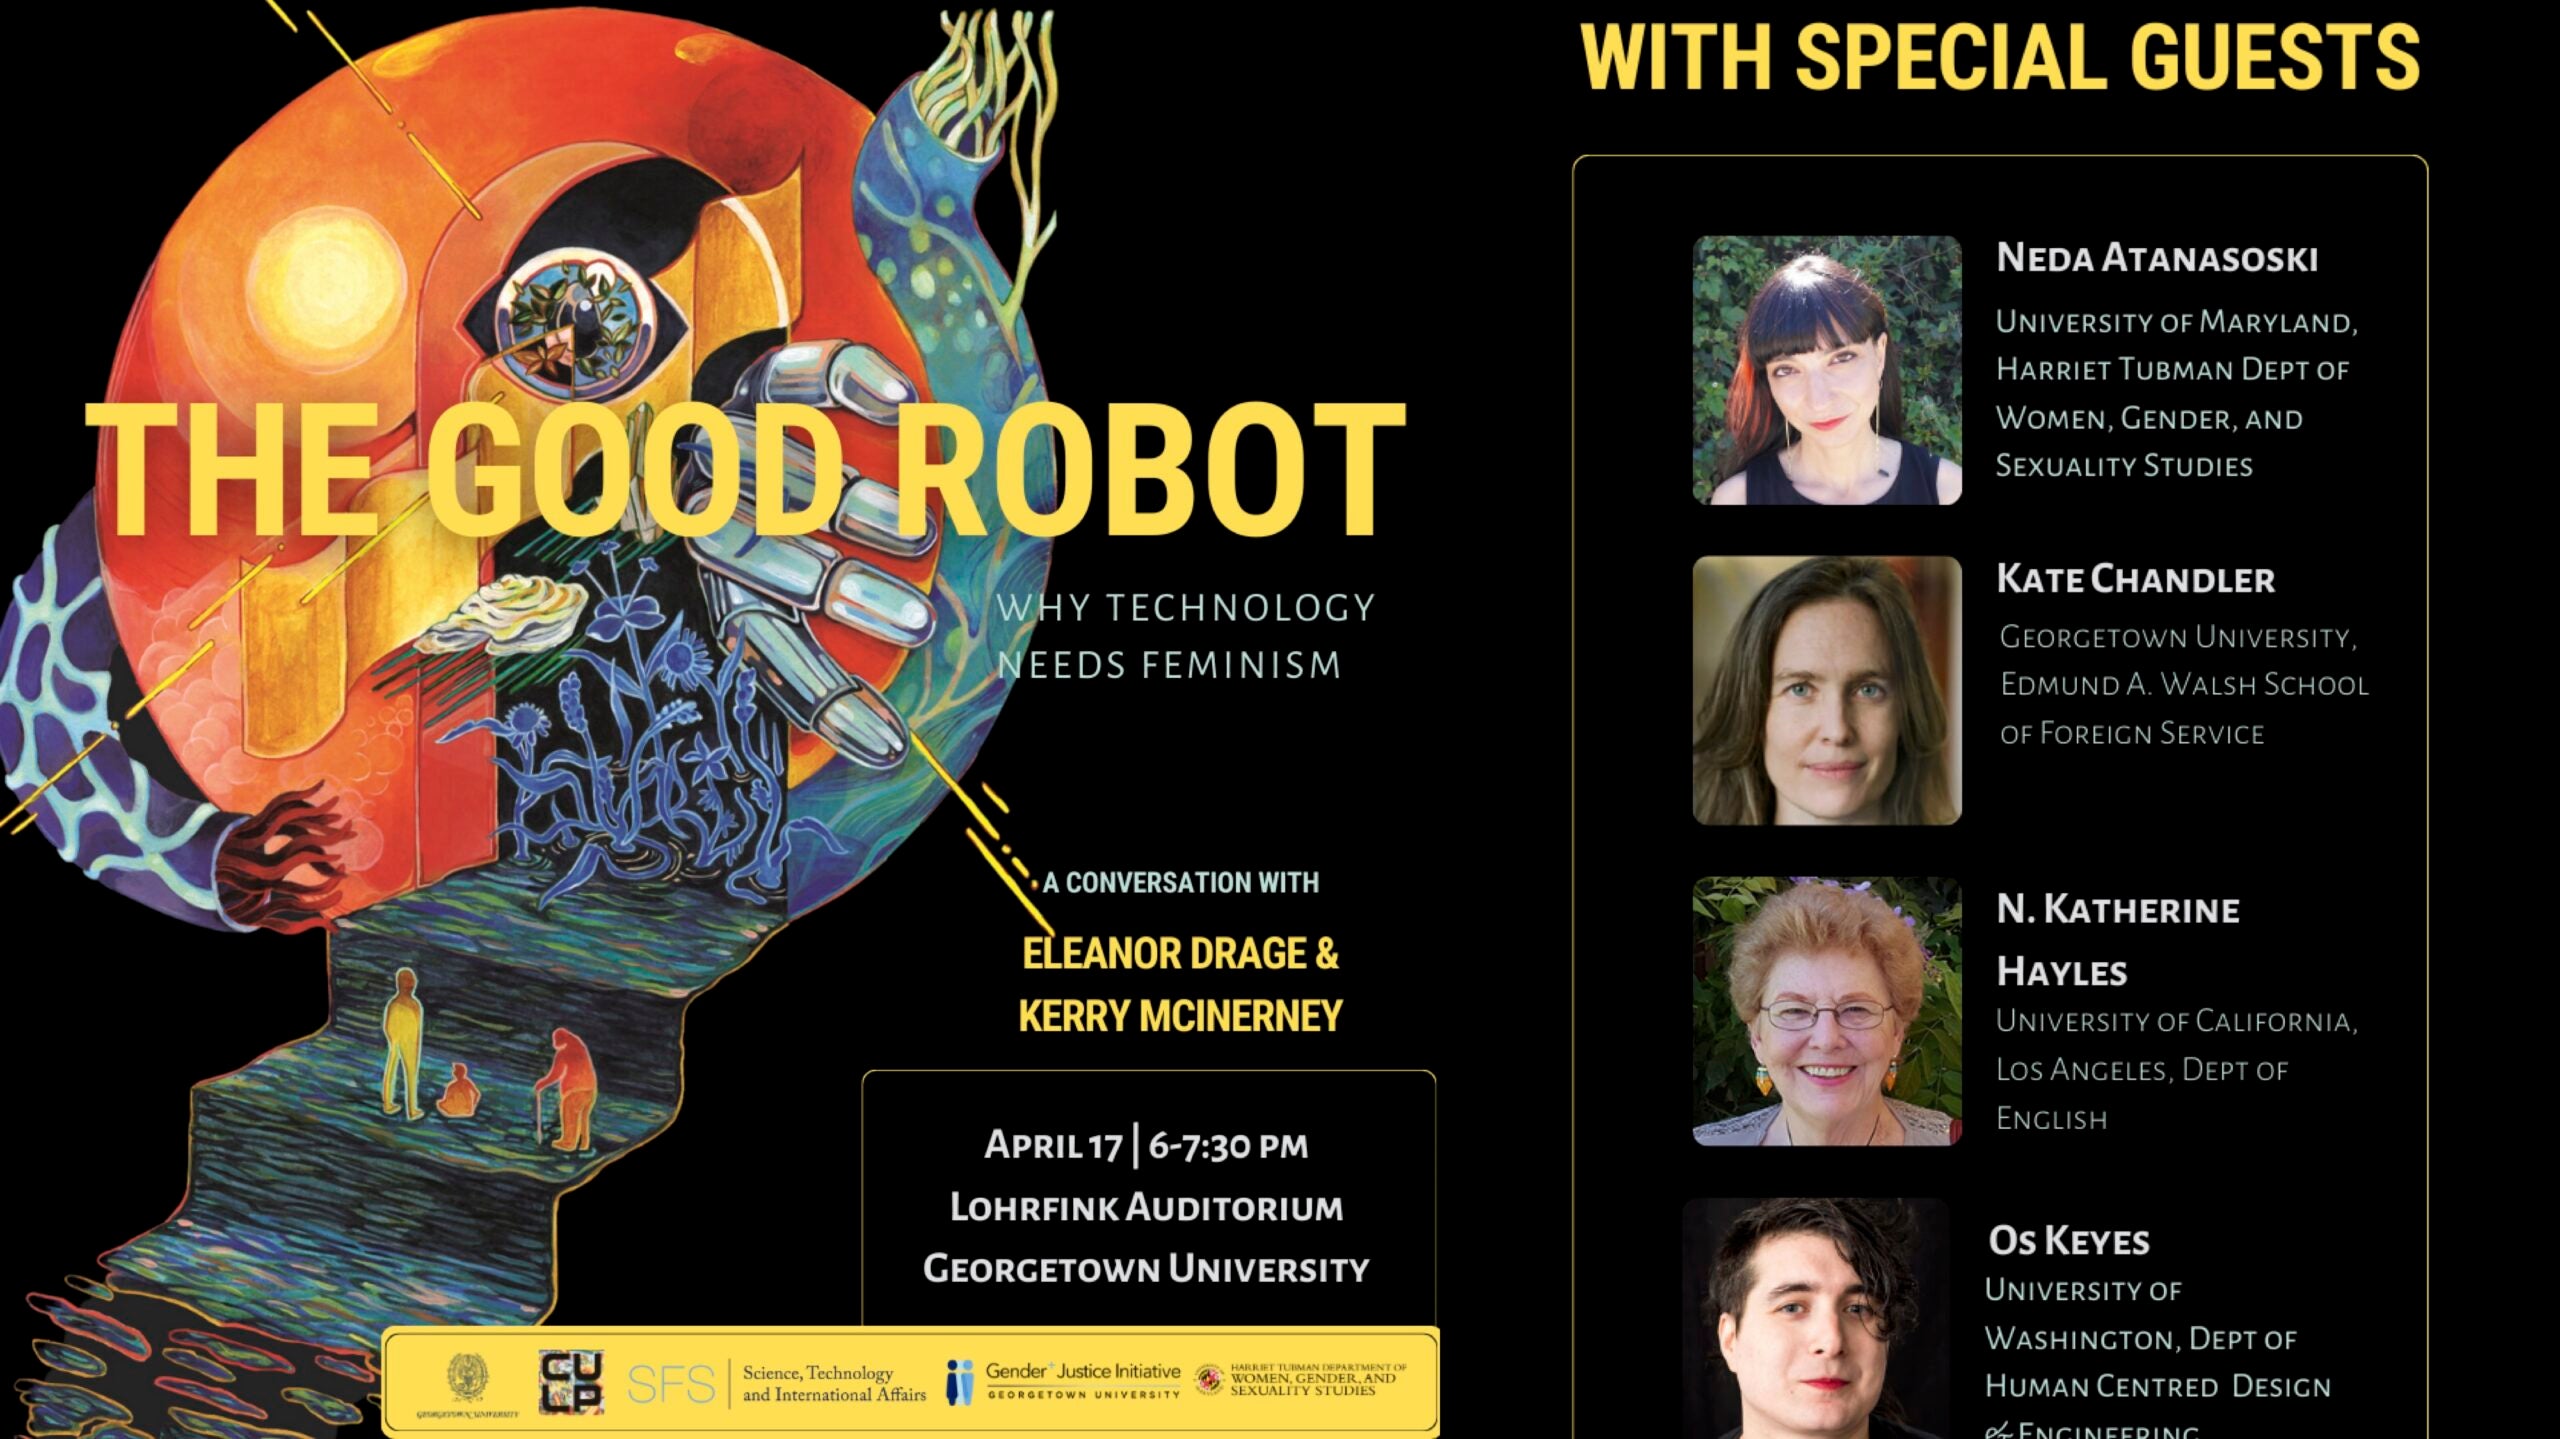 The poster is black with yellow text describing all details of the event with title,date, time, location. The graphic shows a futuristic robot hand, holding the Earth. To the right of the image: Headshots of the panel of experts.